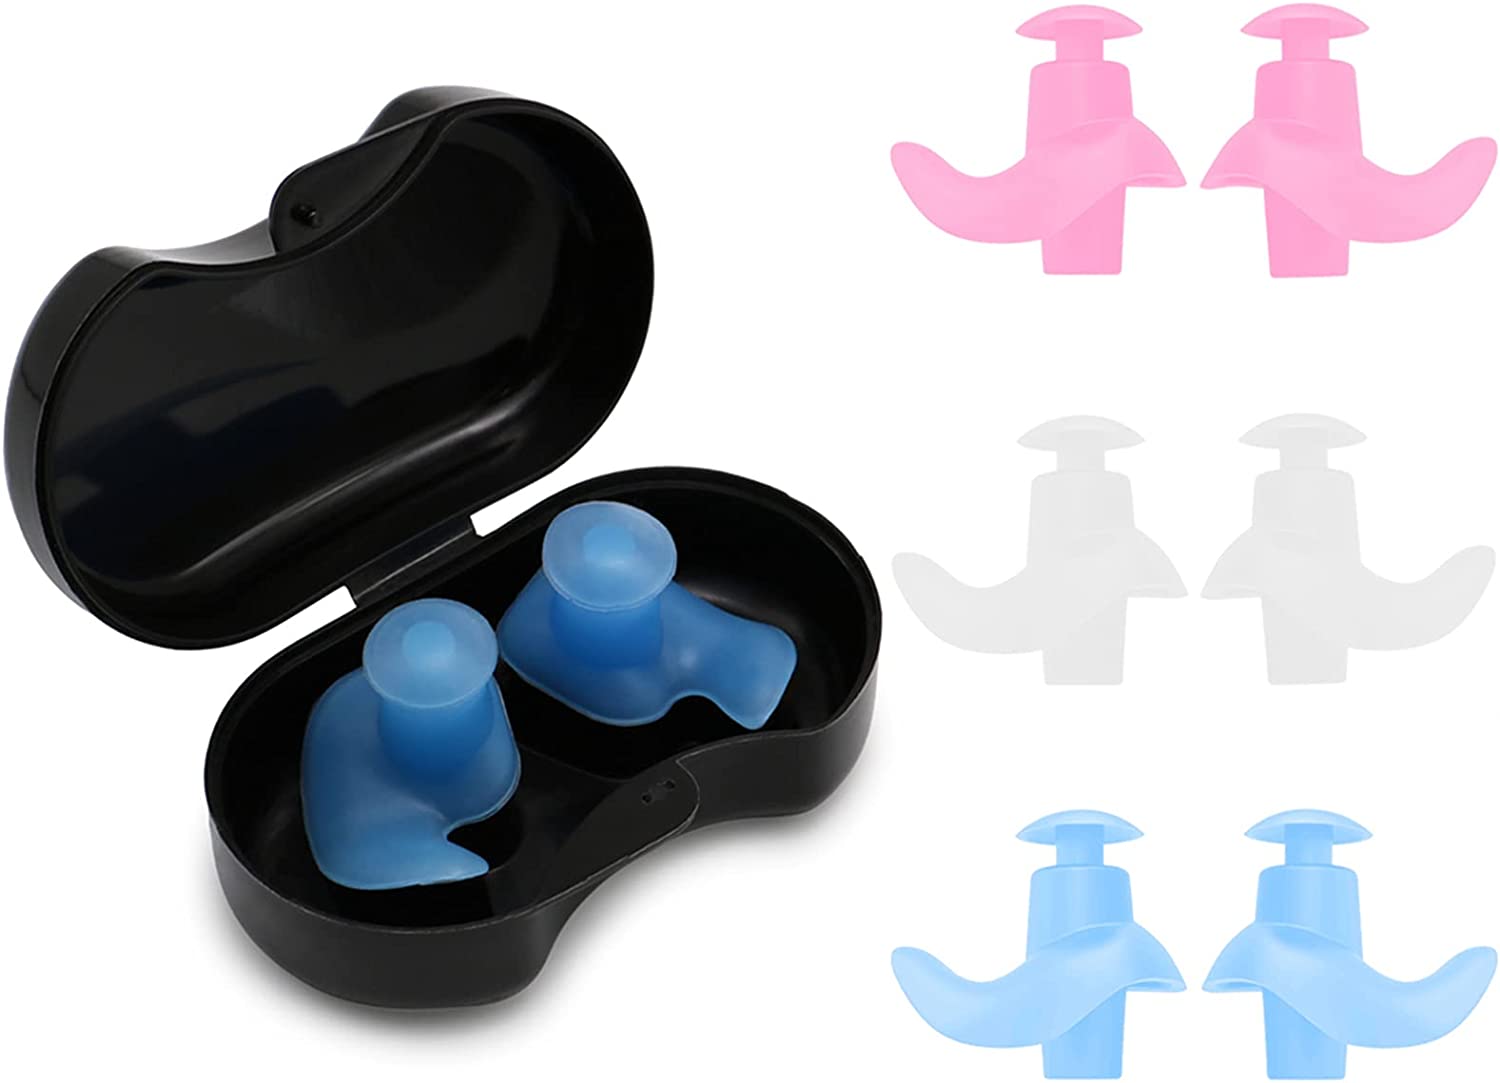 Kids Swimming Ear Plugs, 3 Pairs Professional Waterproof Reusable Silicone Earplugs Swimming Earplugs for Swimming Surfing Snorkeling Showering Bathing Suitable for 5-14 Years Old Kids
